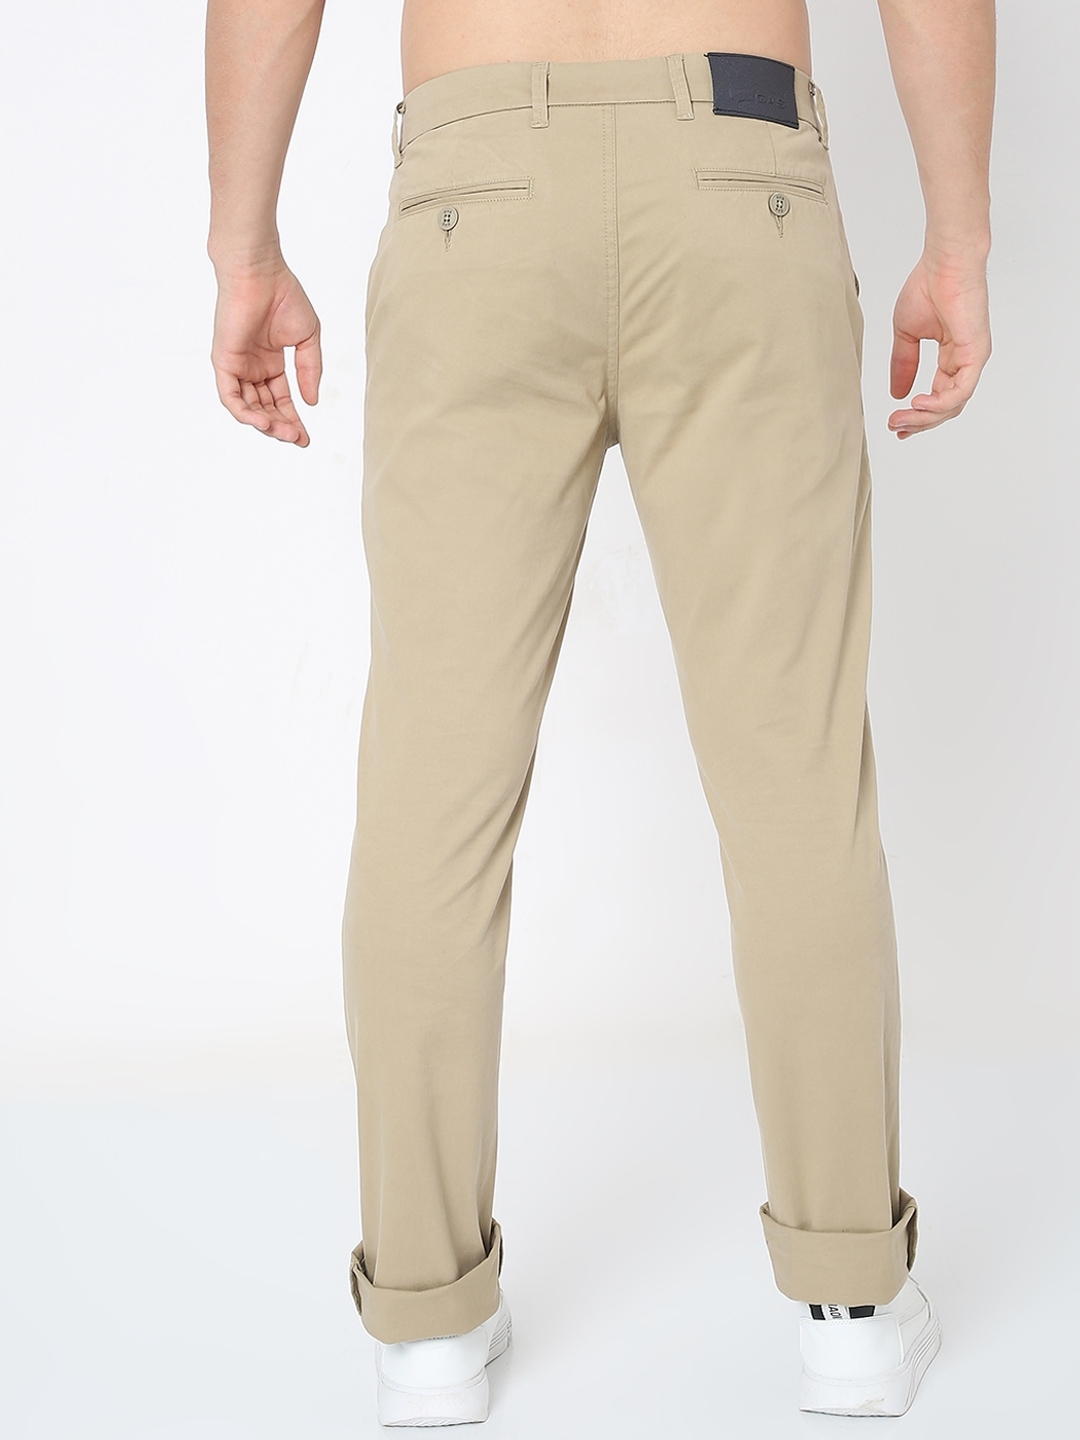 White Pleated cotton chino trousers | Polo Ralph Lauren | MATCHES UK